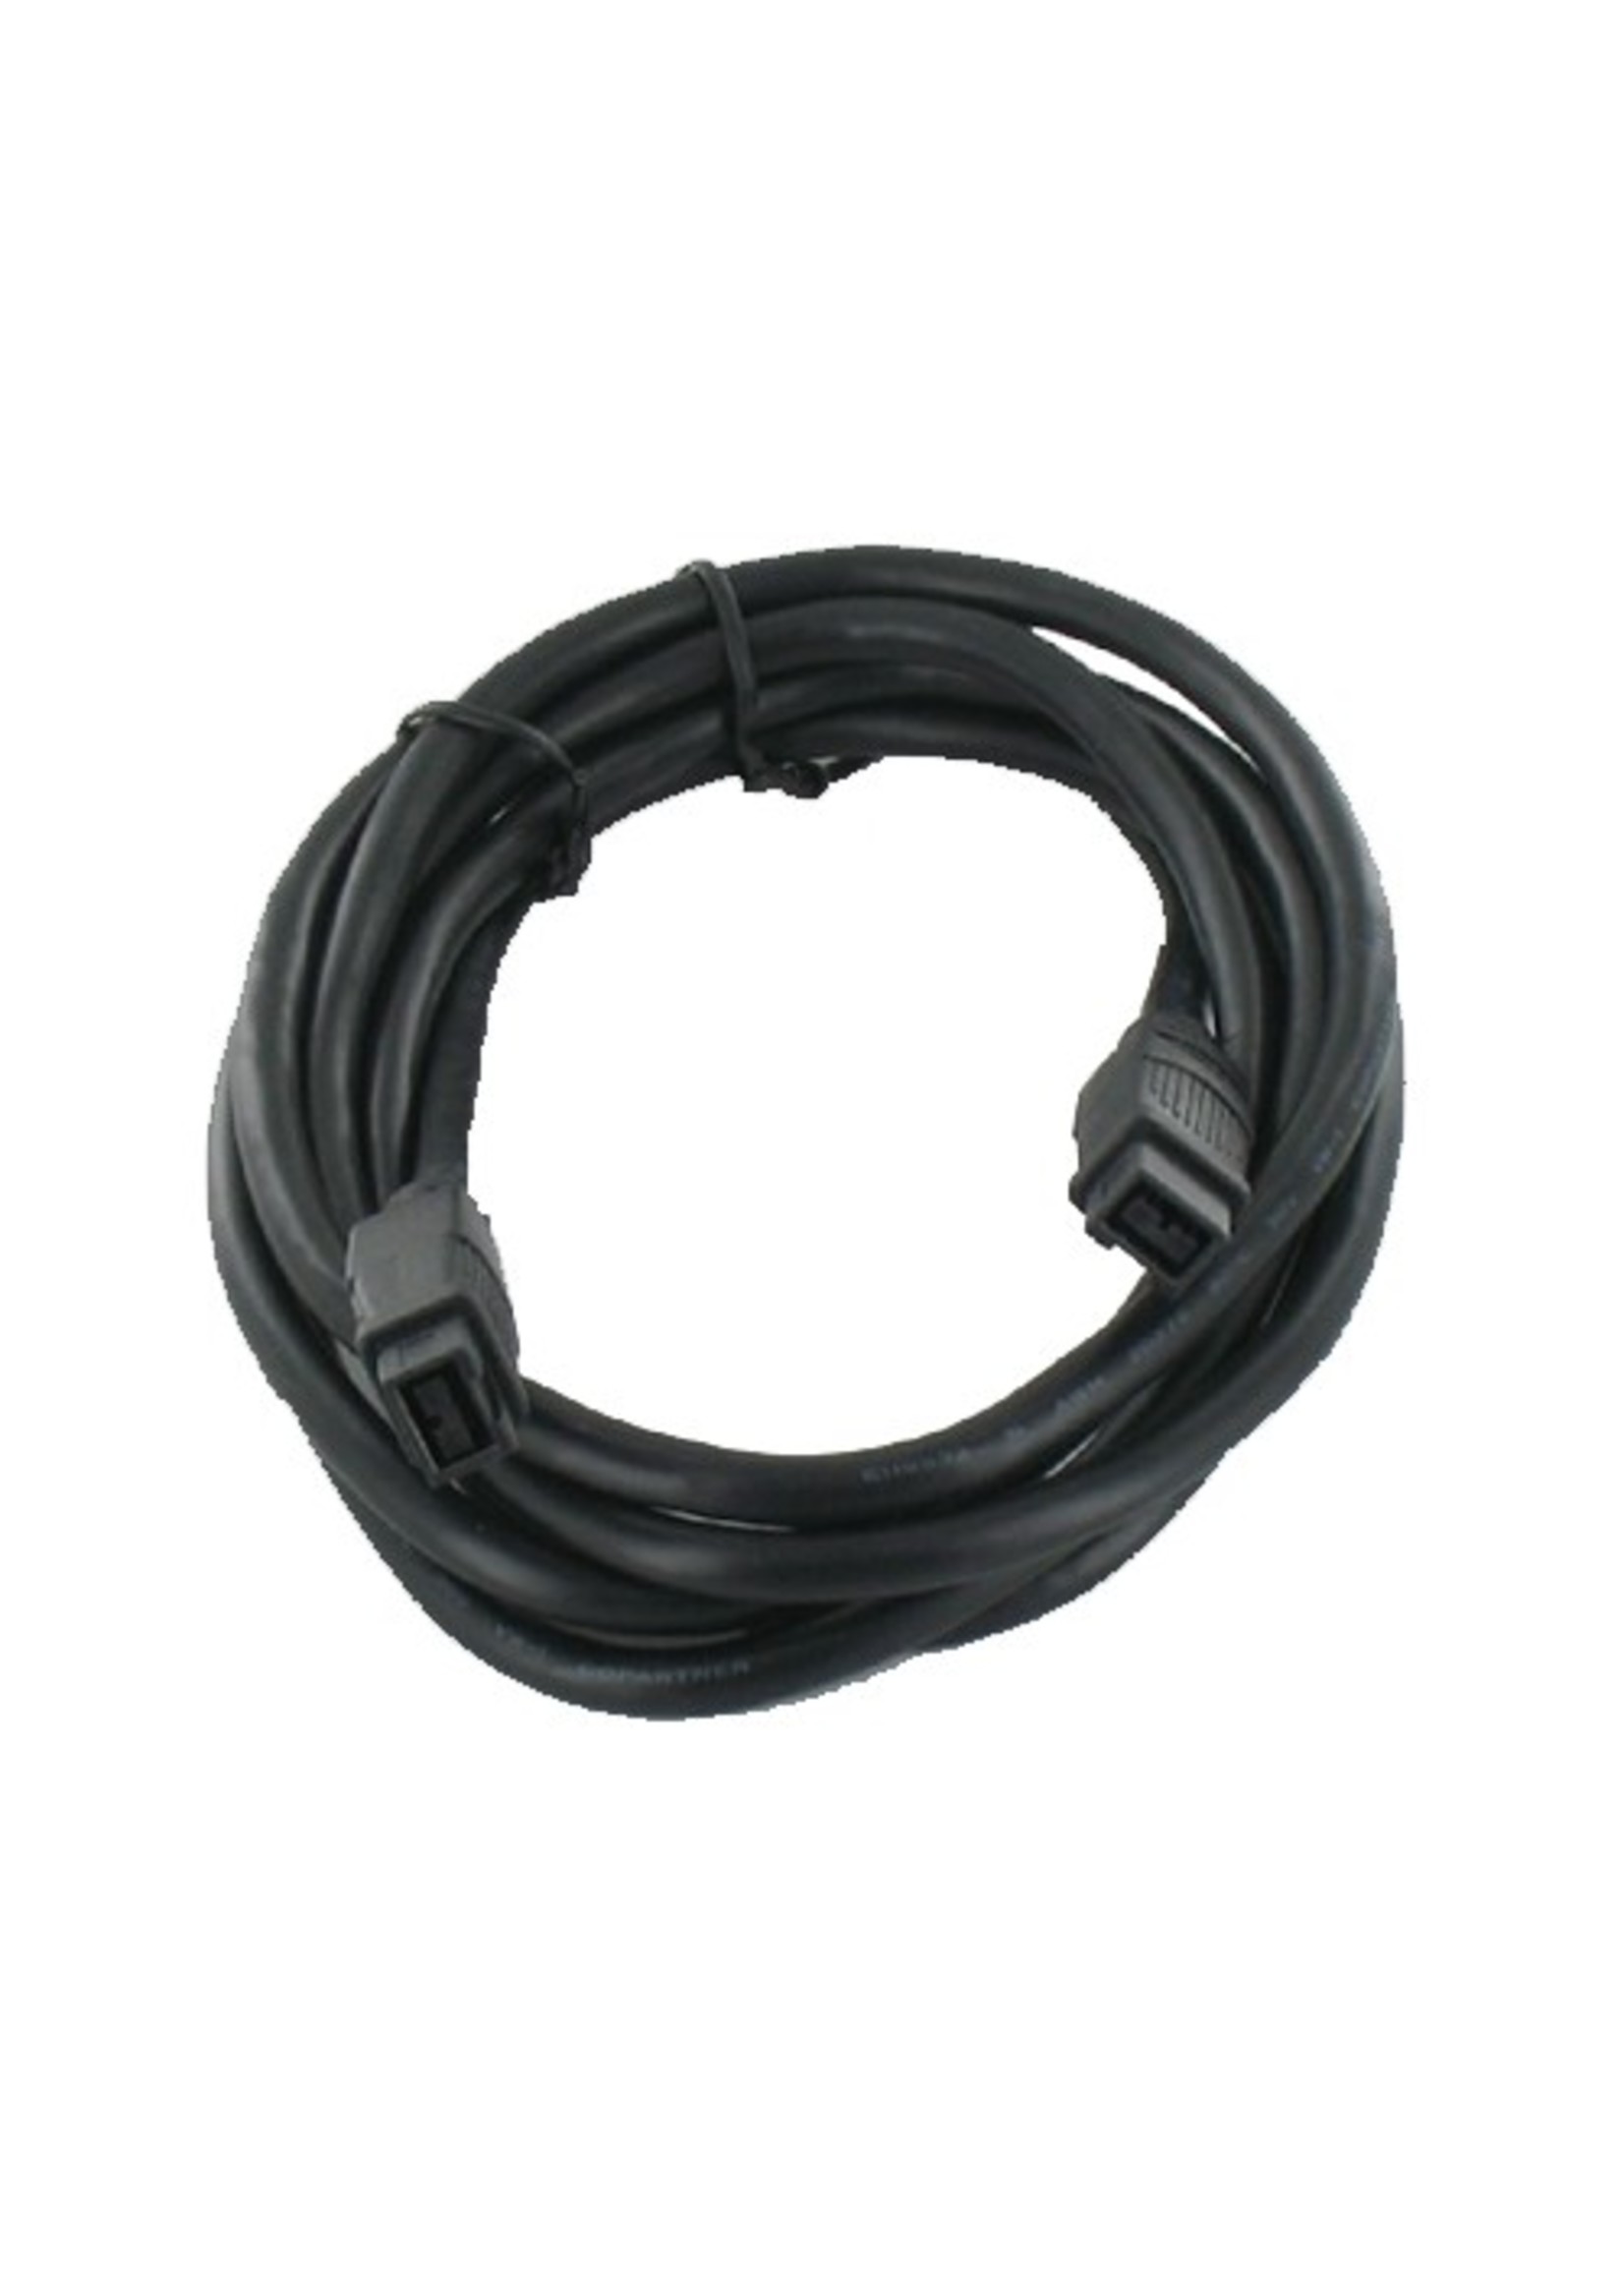 FireWire 9 Pin Cable 1.5 Meter